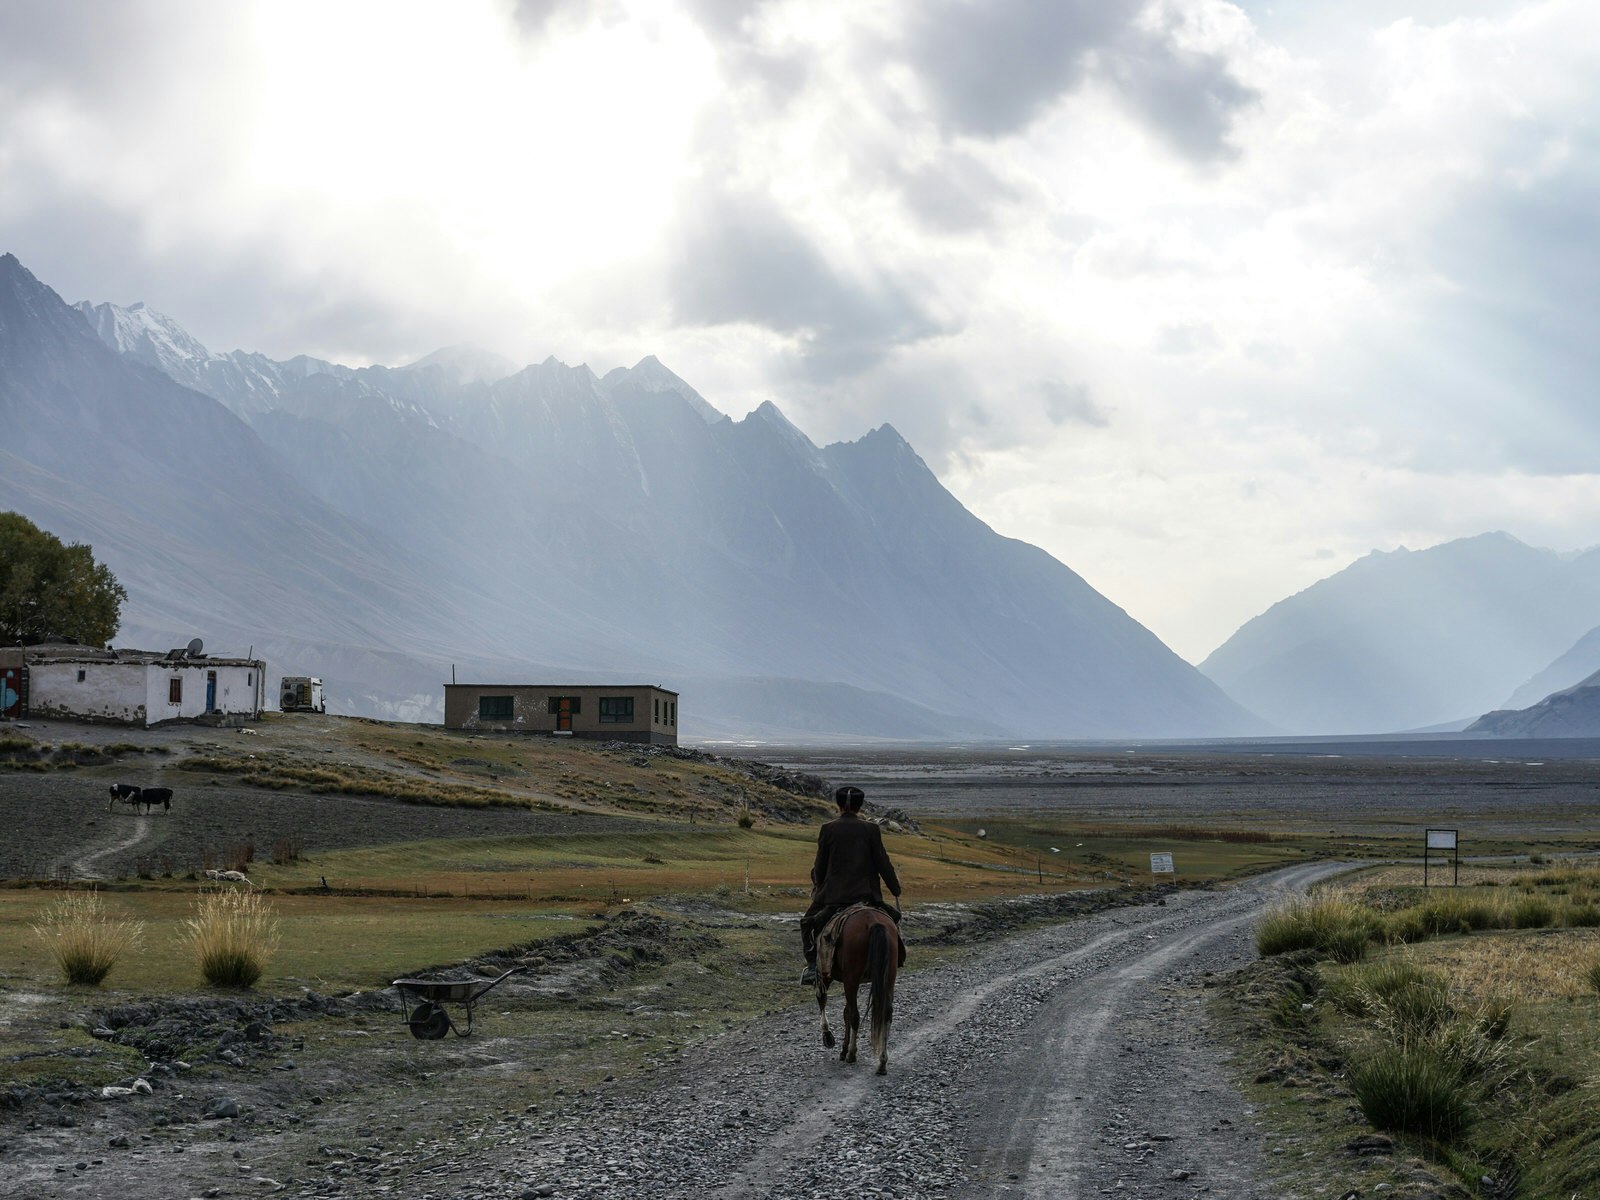 A man rides a donkey down a desolate dirt road with huge mountains in the background